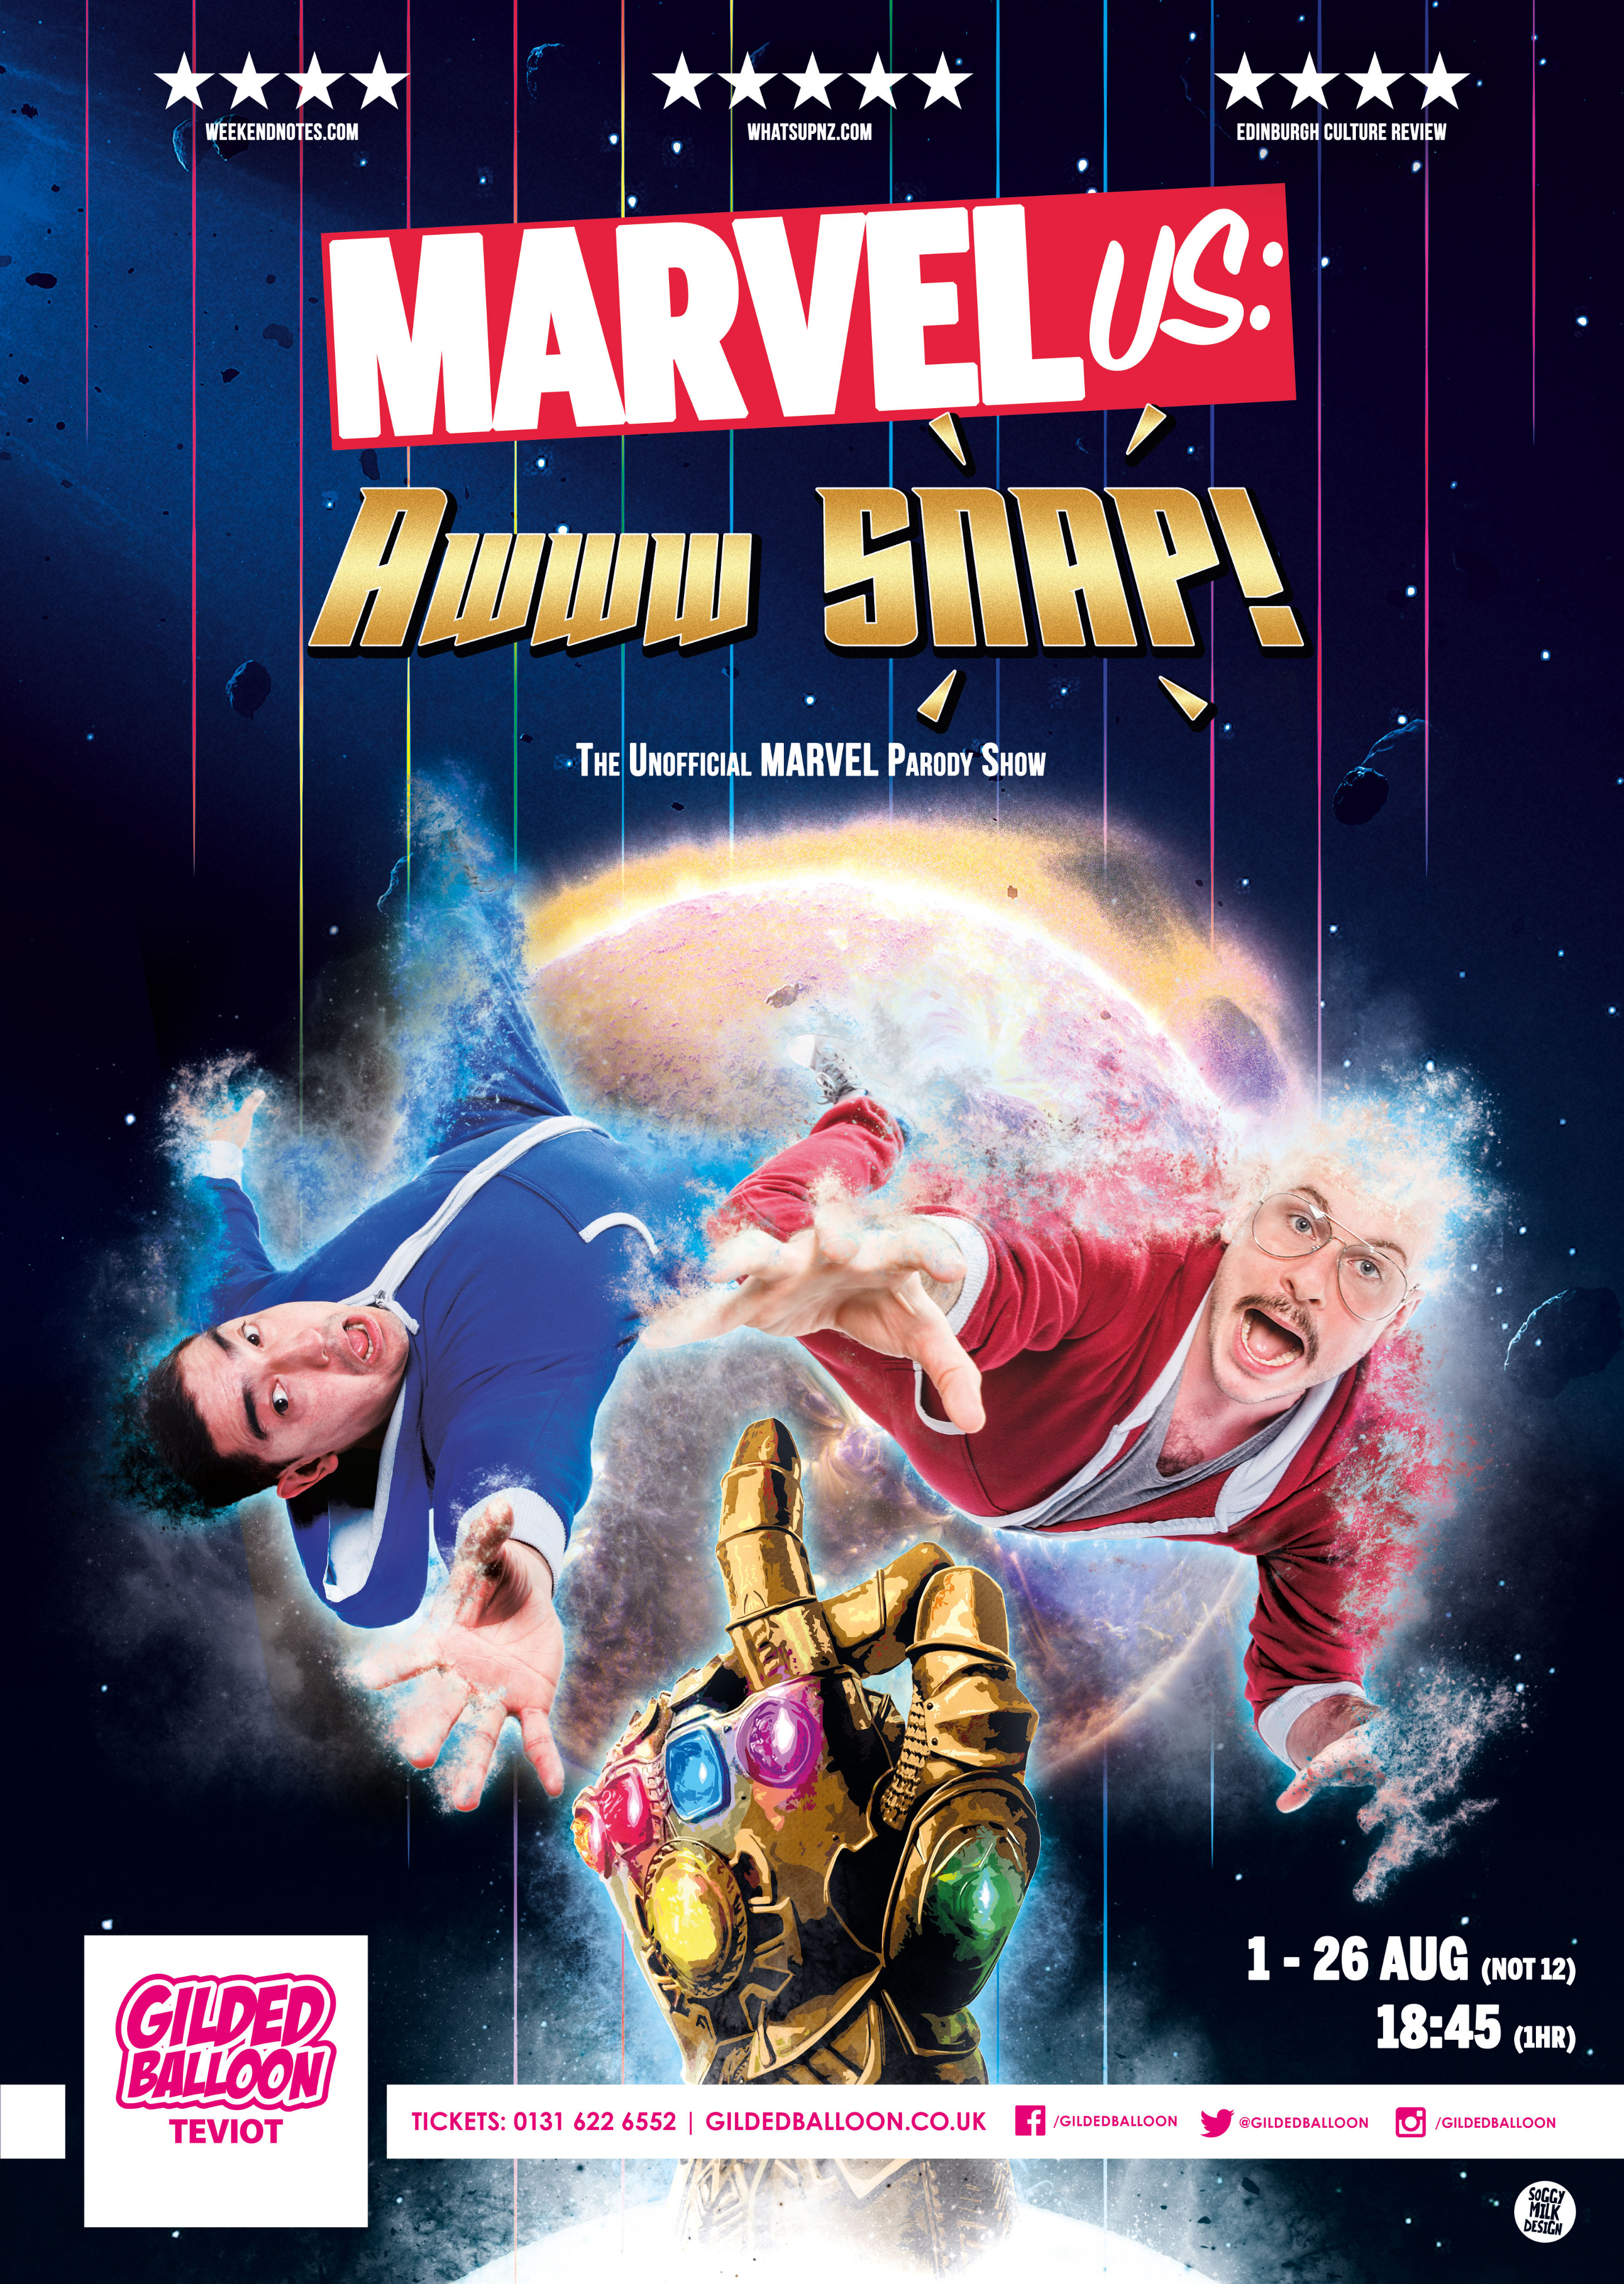 The poster for MARVELus: Awww Snap!